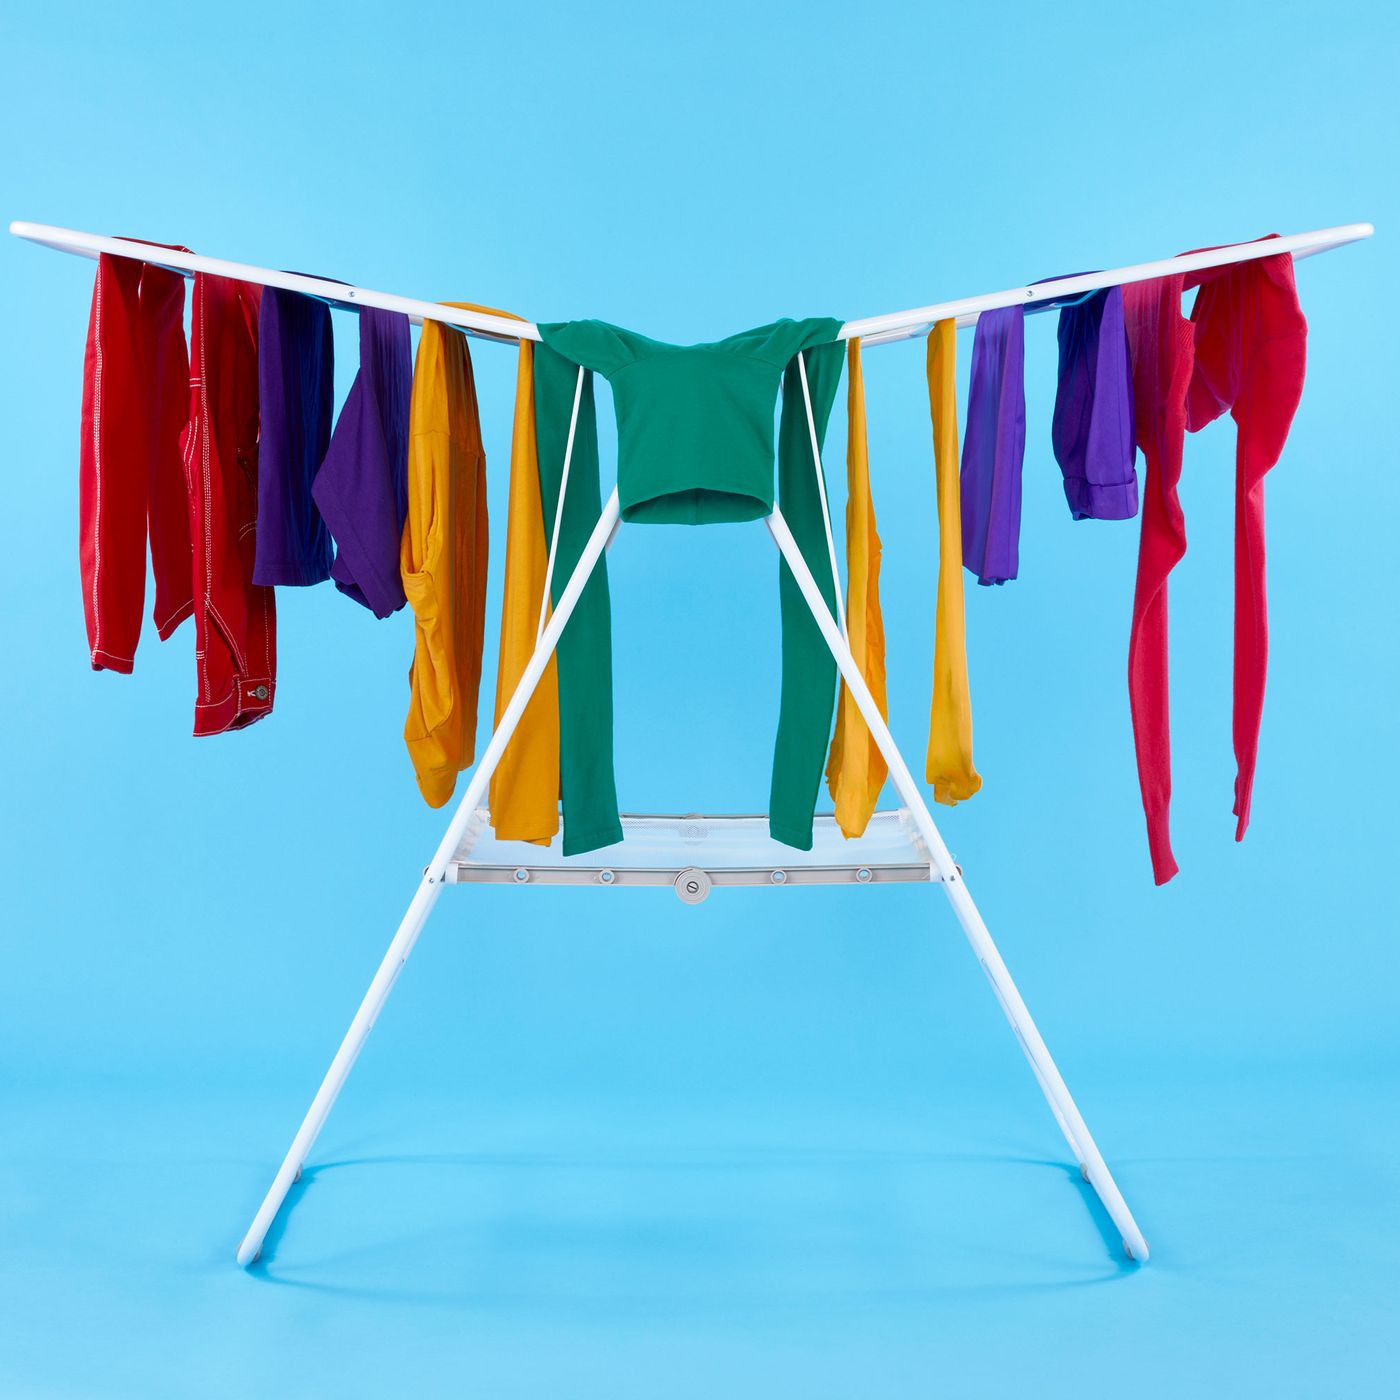 The Types of Garden Washing Line to Dry Laundry Outdoors - MY